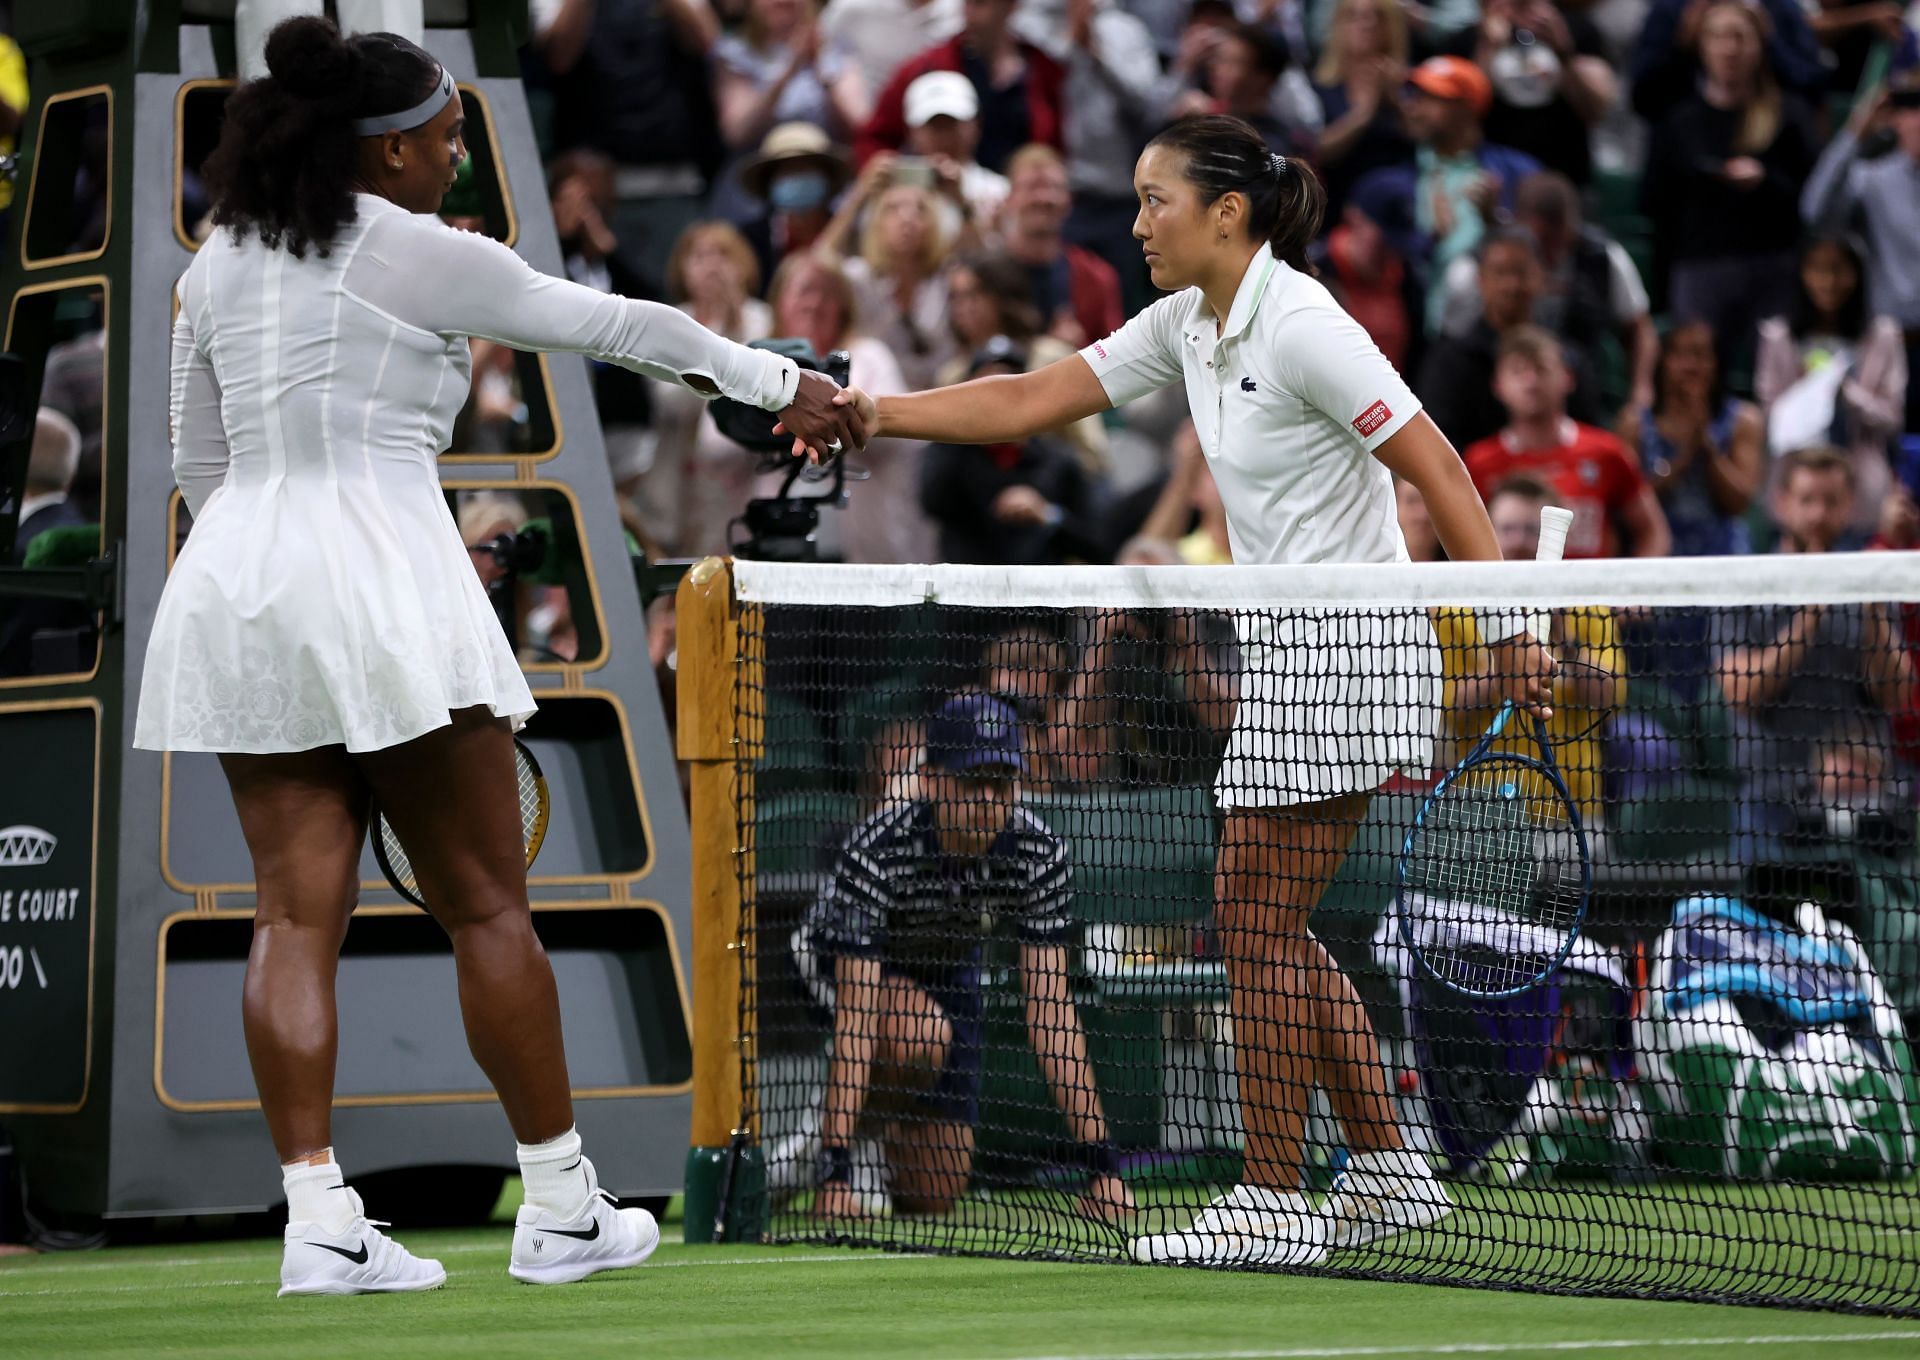 Harmony Tan beat Serena in the first round at Wimbledon 2022